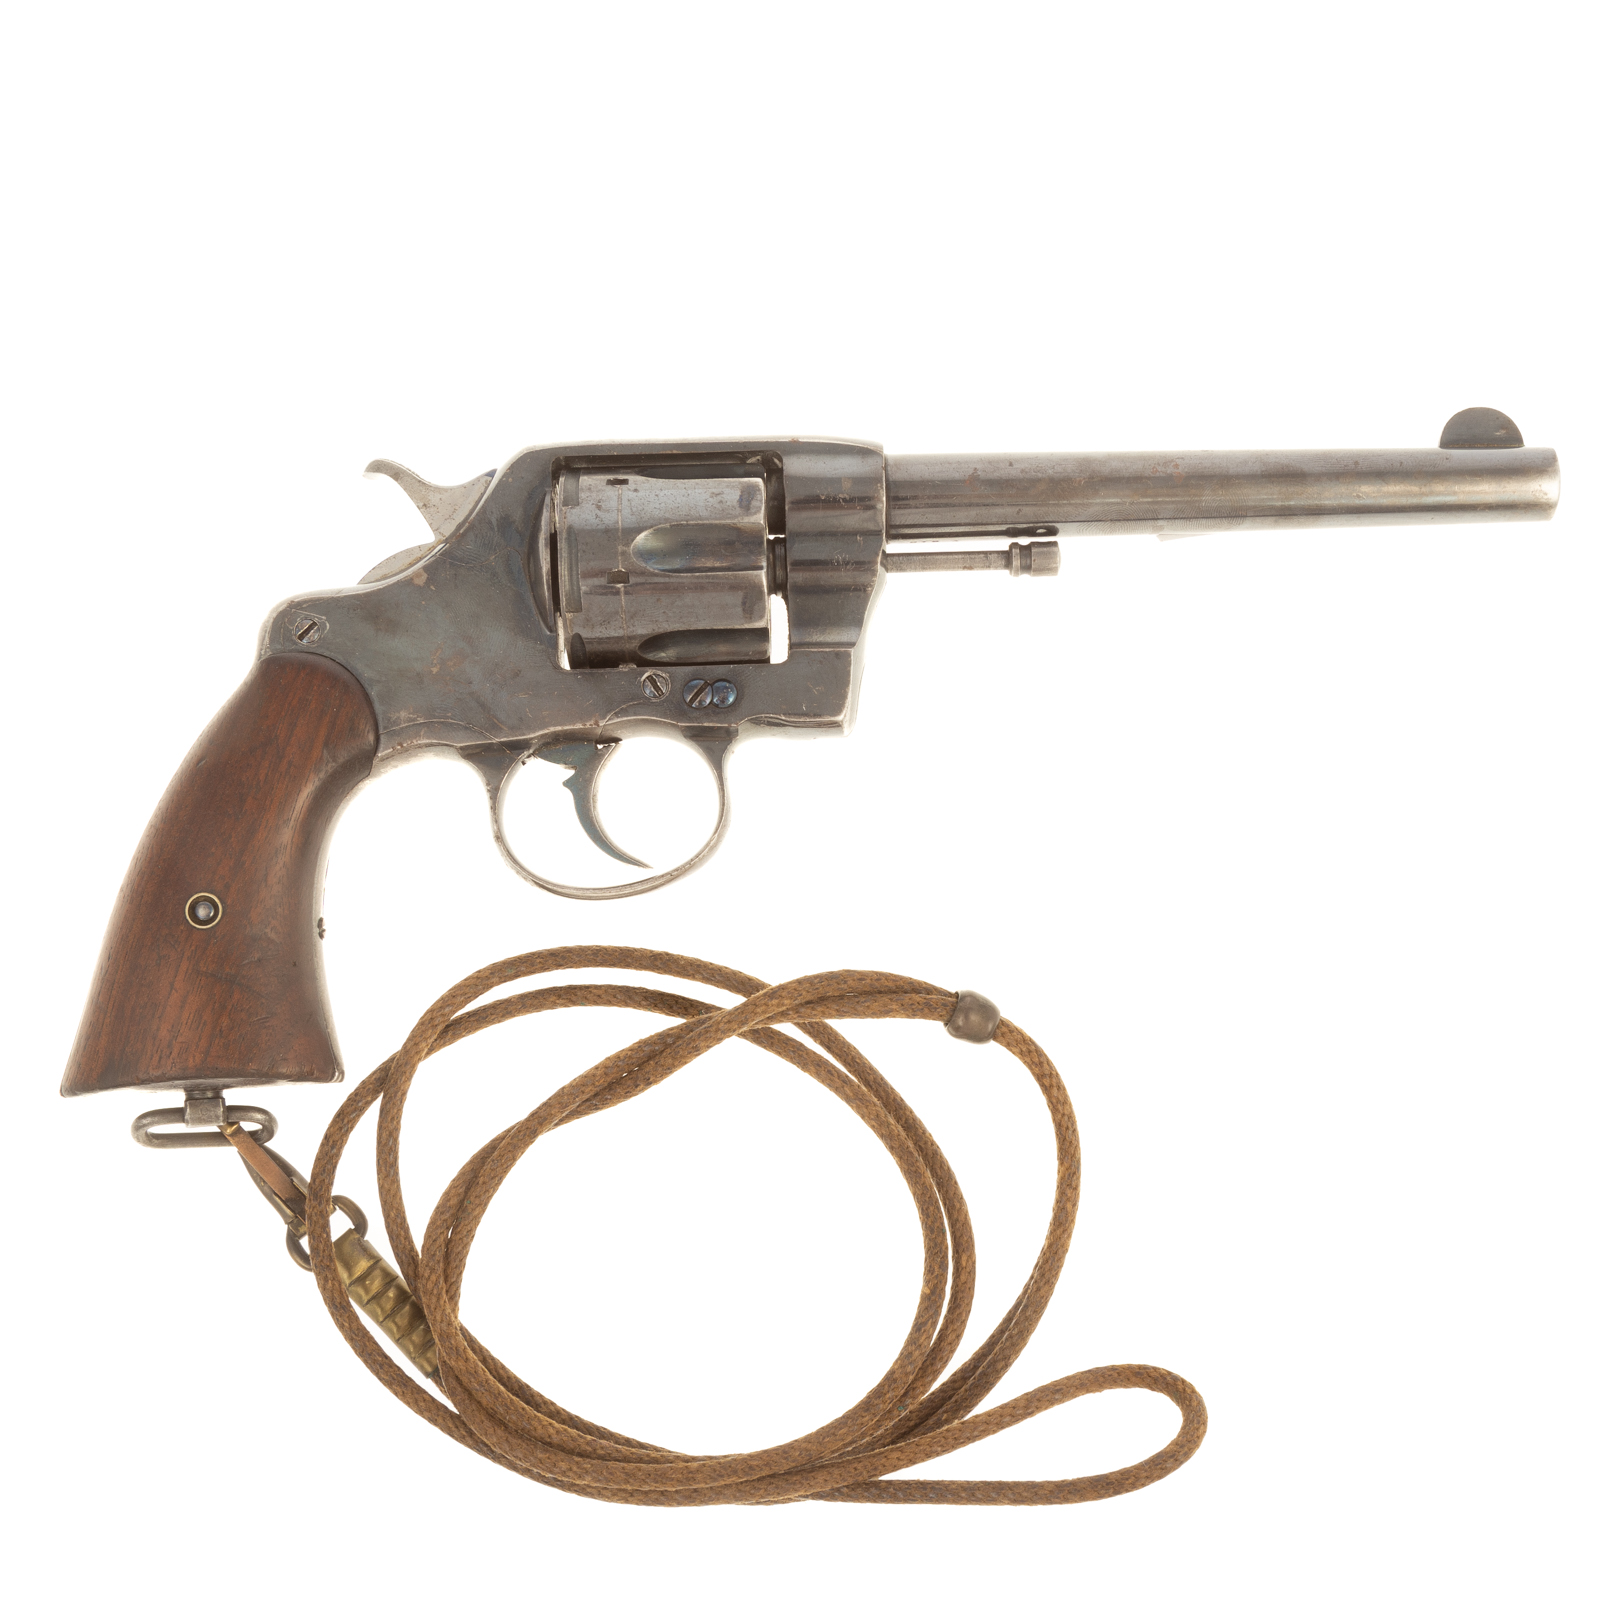 COLT U.S. ARMY MODEL 1901, DOUBLE